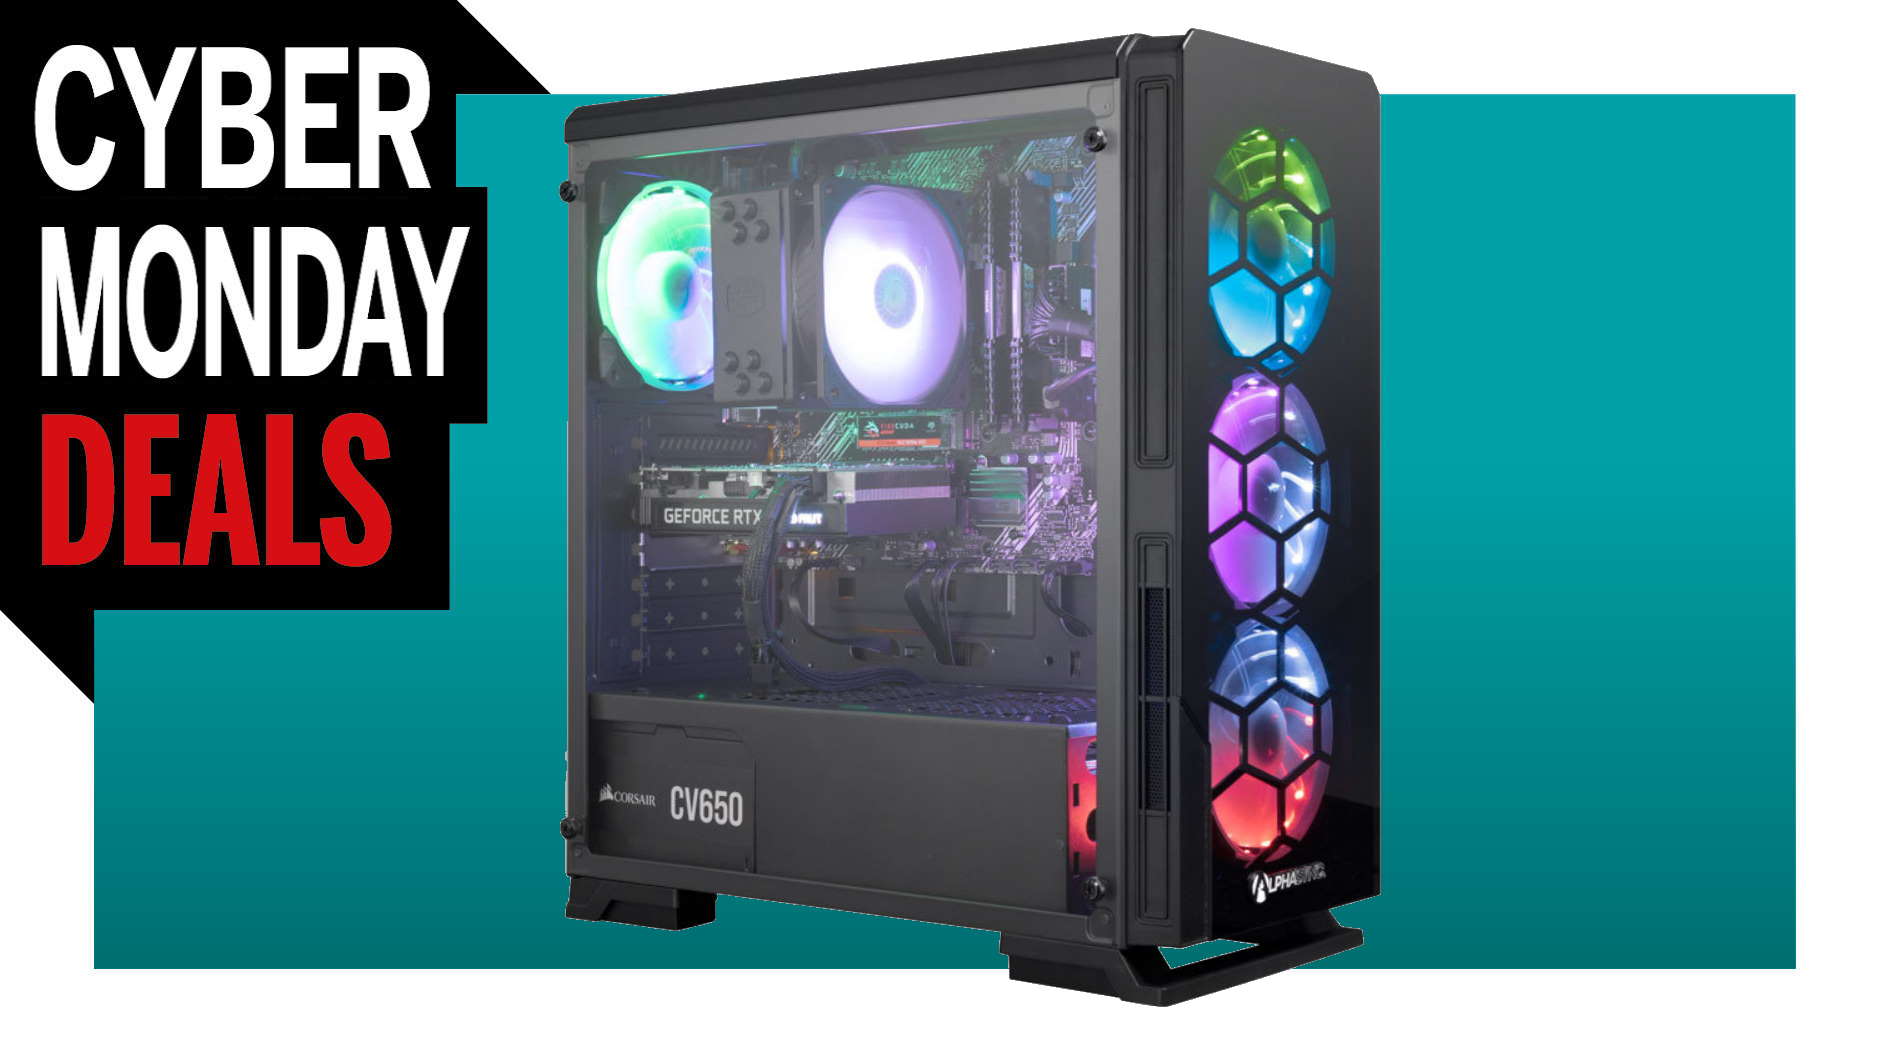 Grab The Latest AMD And Nvidia GPU Tech In These ~£1,000 Cyber Monday Gaming PCs thumbnail